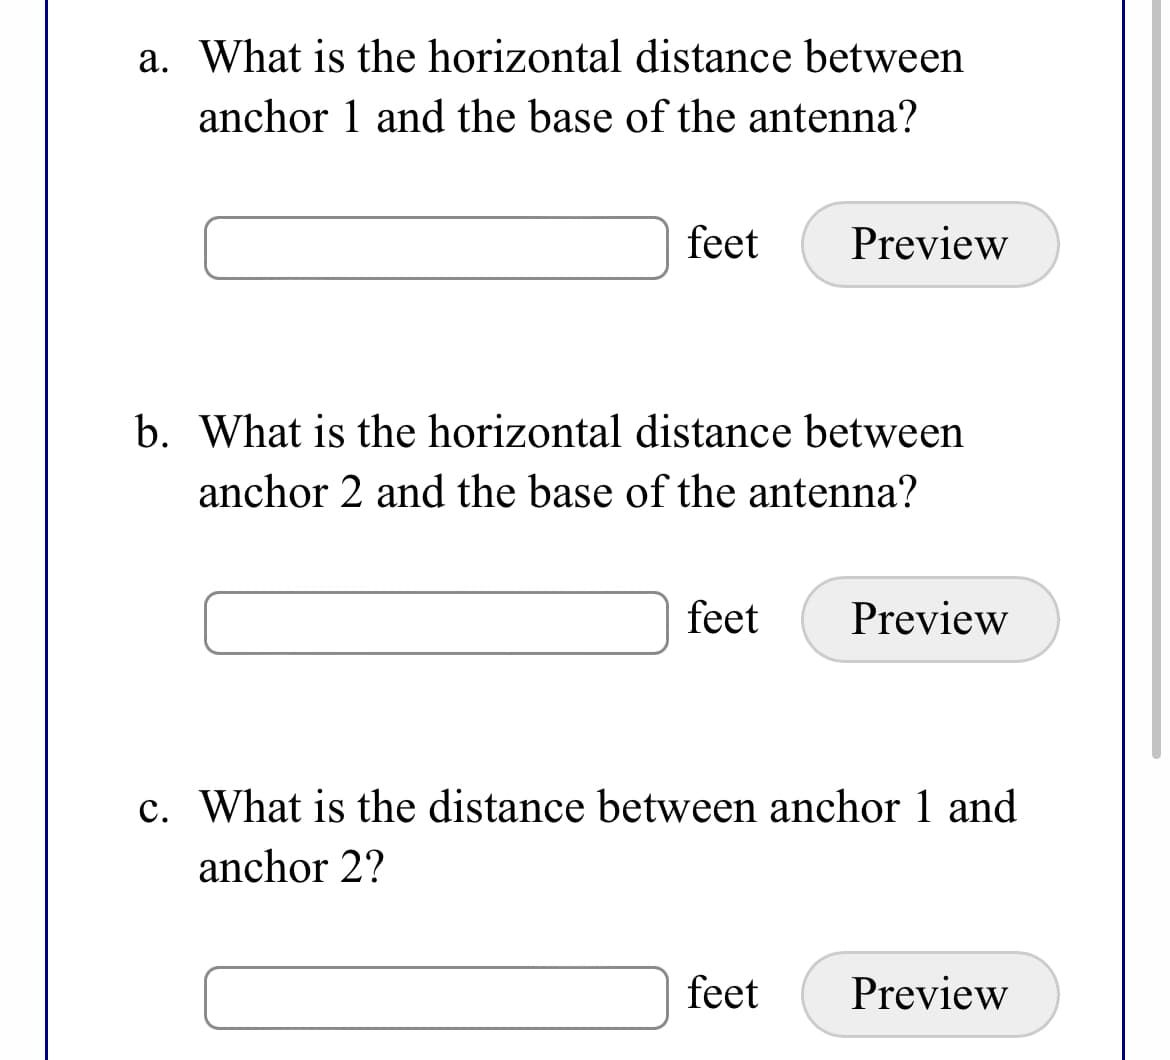 a. What is the horizontal distance between
anchor 1 and the base of the antenna?
feet
Preview
b. What is the horizontal distance between
anchor 2 and the base of the antenna?
feet
Preview
c. What is the distance between anchor 1 and
anchor 2?
feet
Preview
